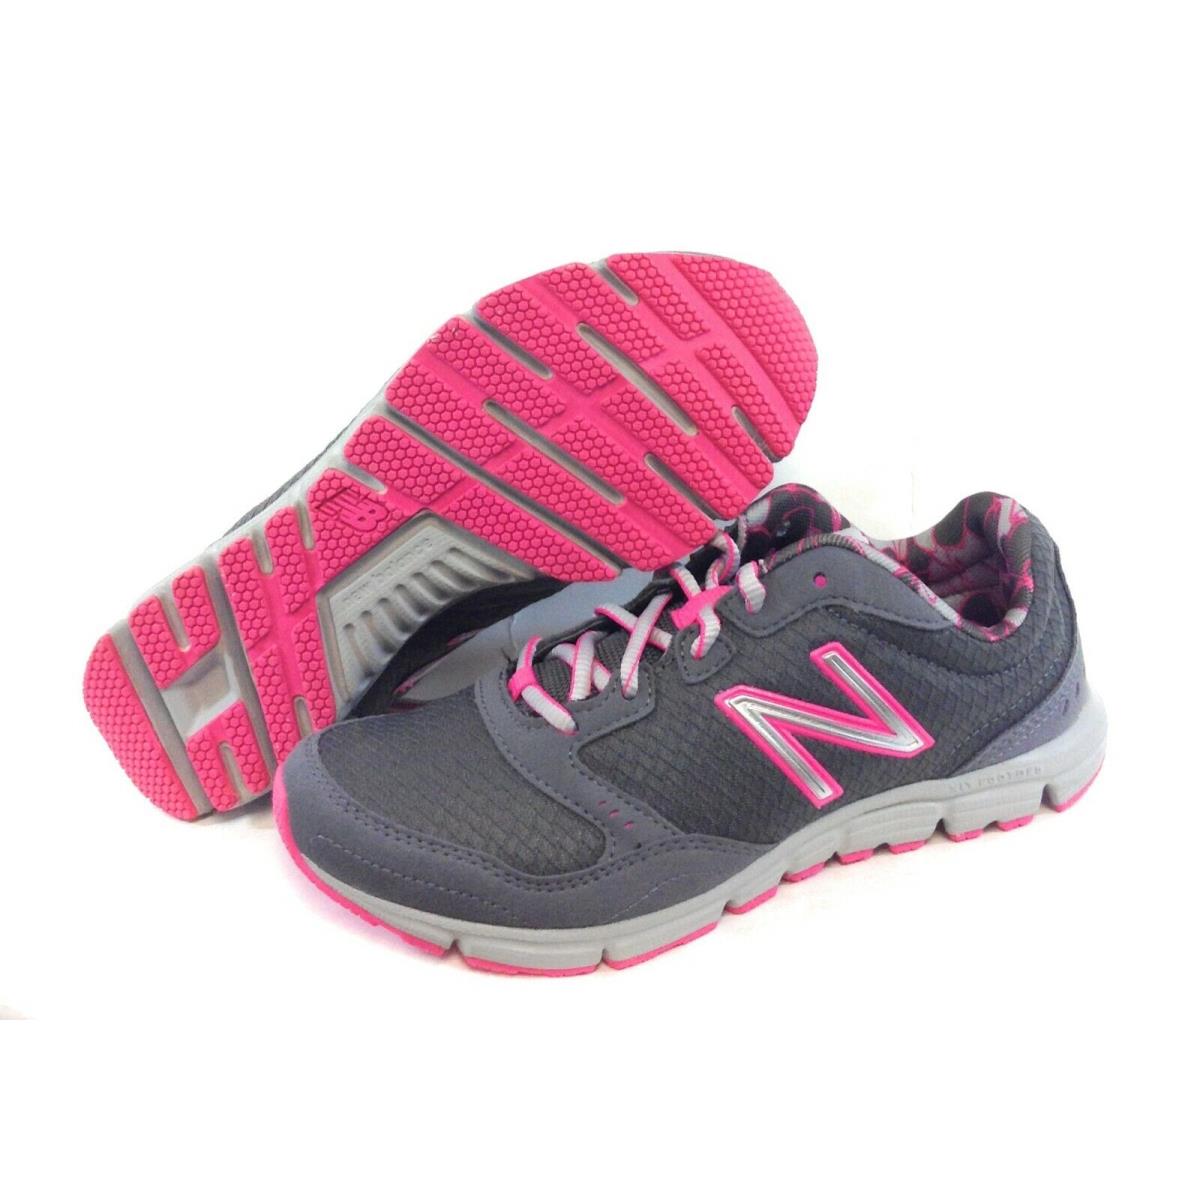 Womens New Balance 630 SP2 Dark Grey Silver Pink Running Sneakers Shoes